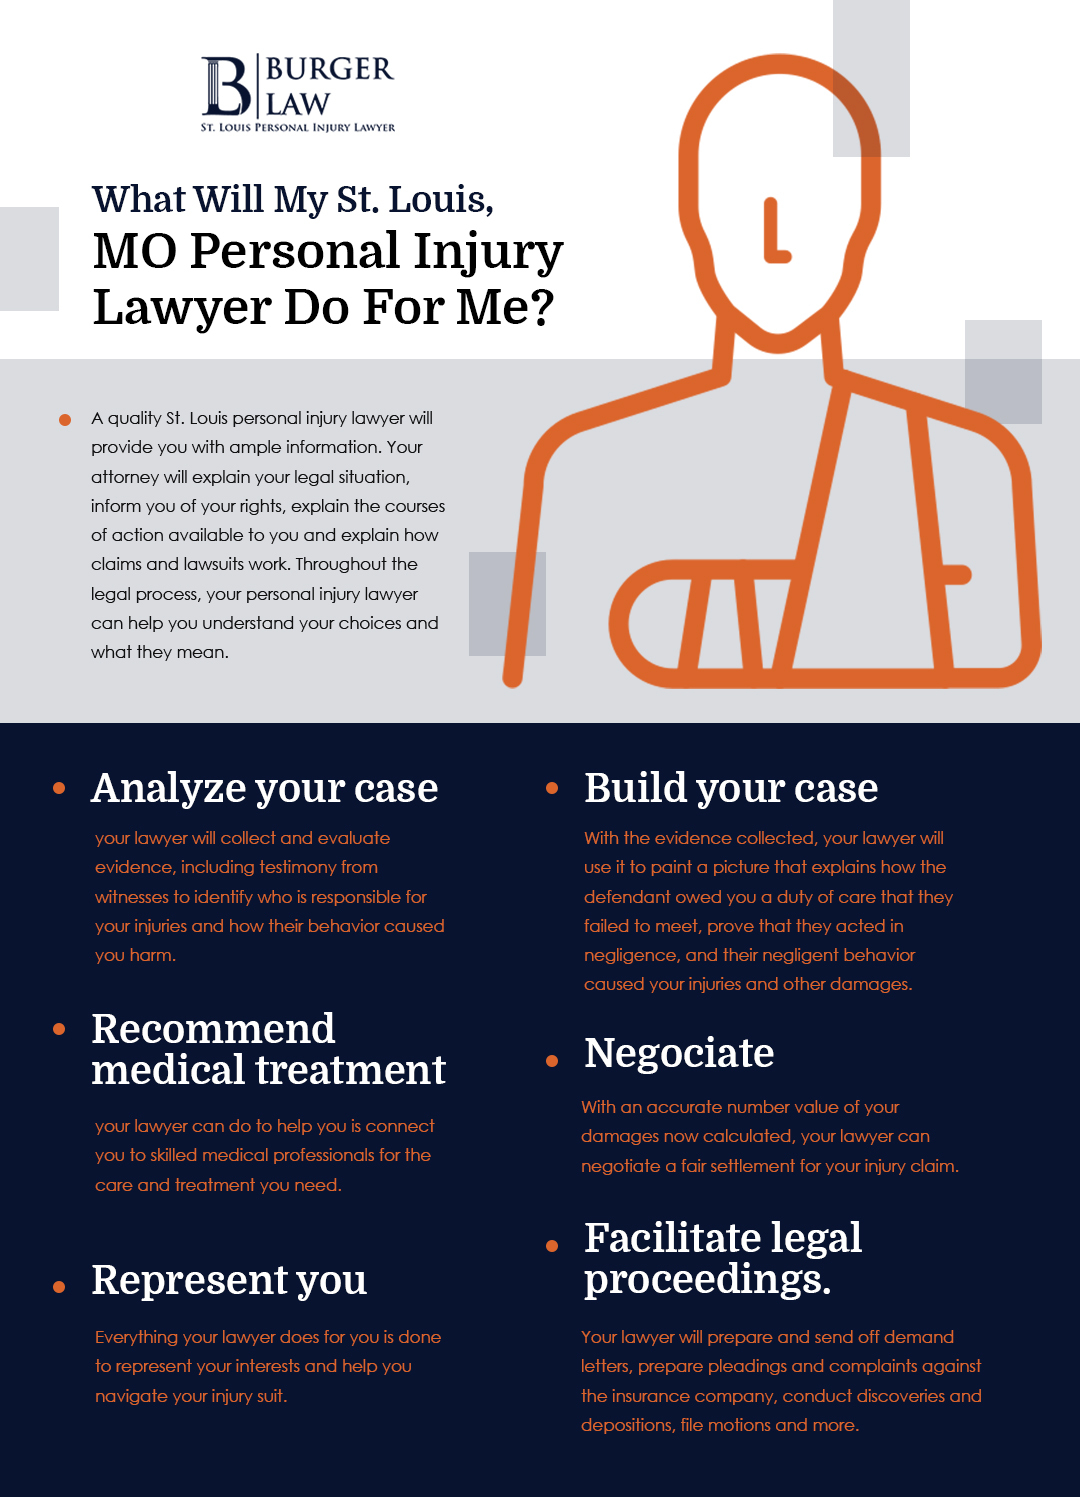 What Will My St. Louis, MO Personal Injury Lawyer Do For Me?